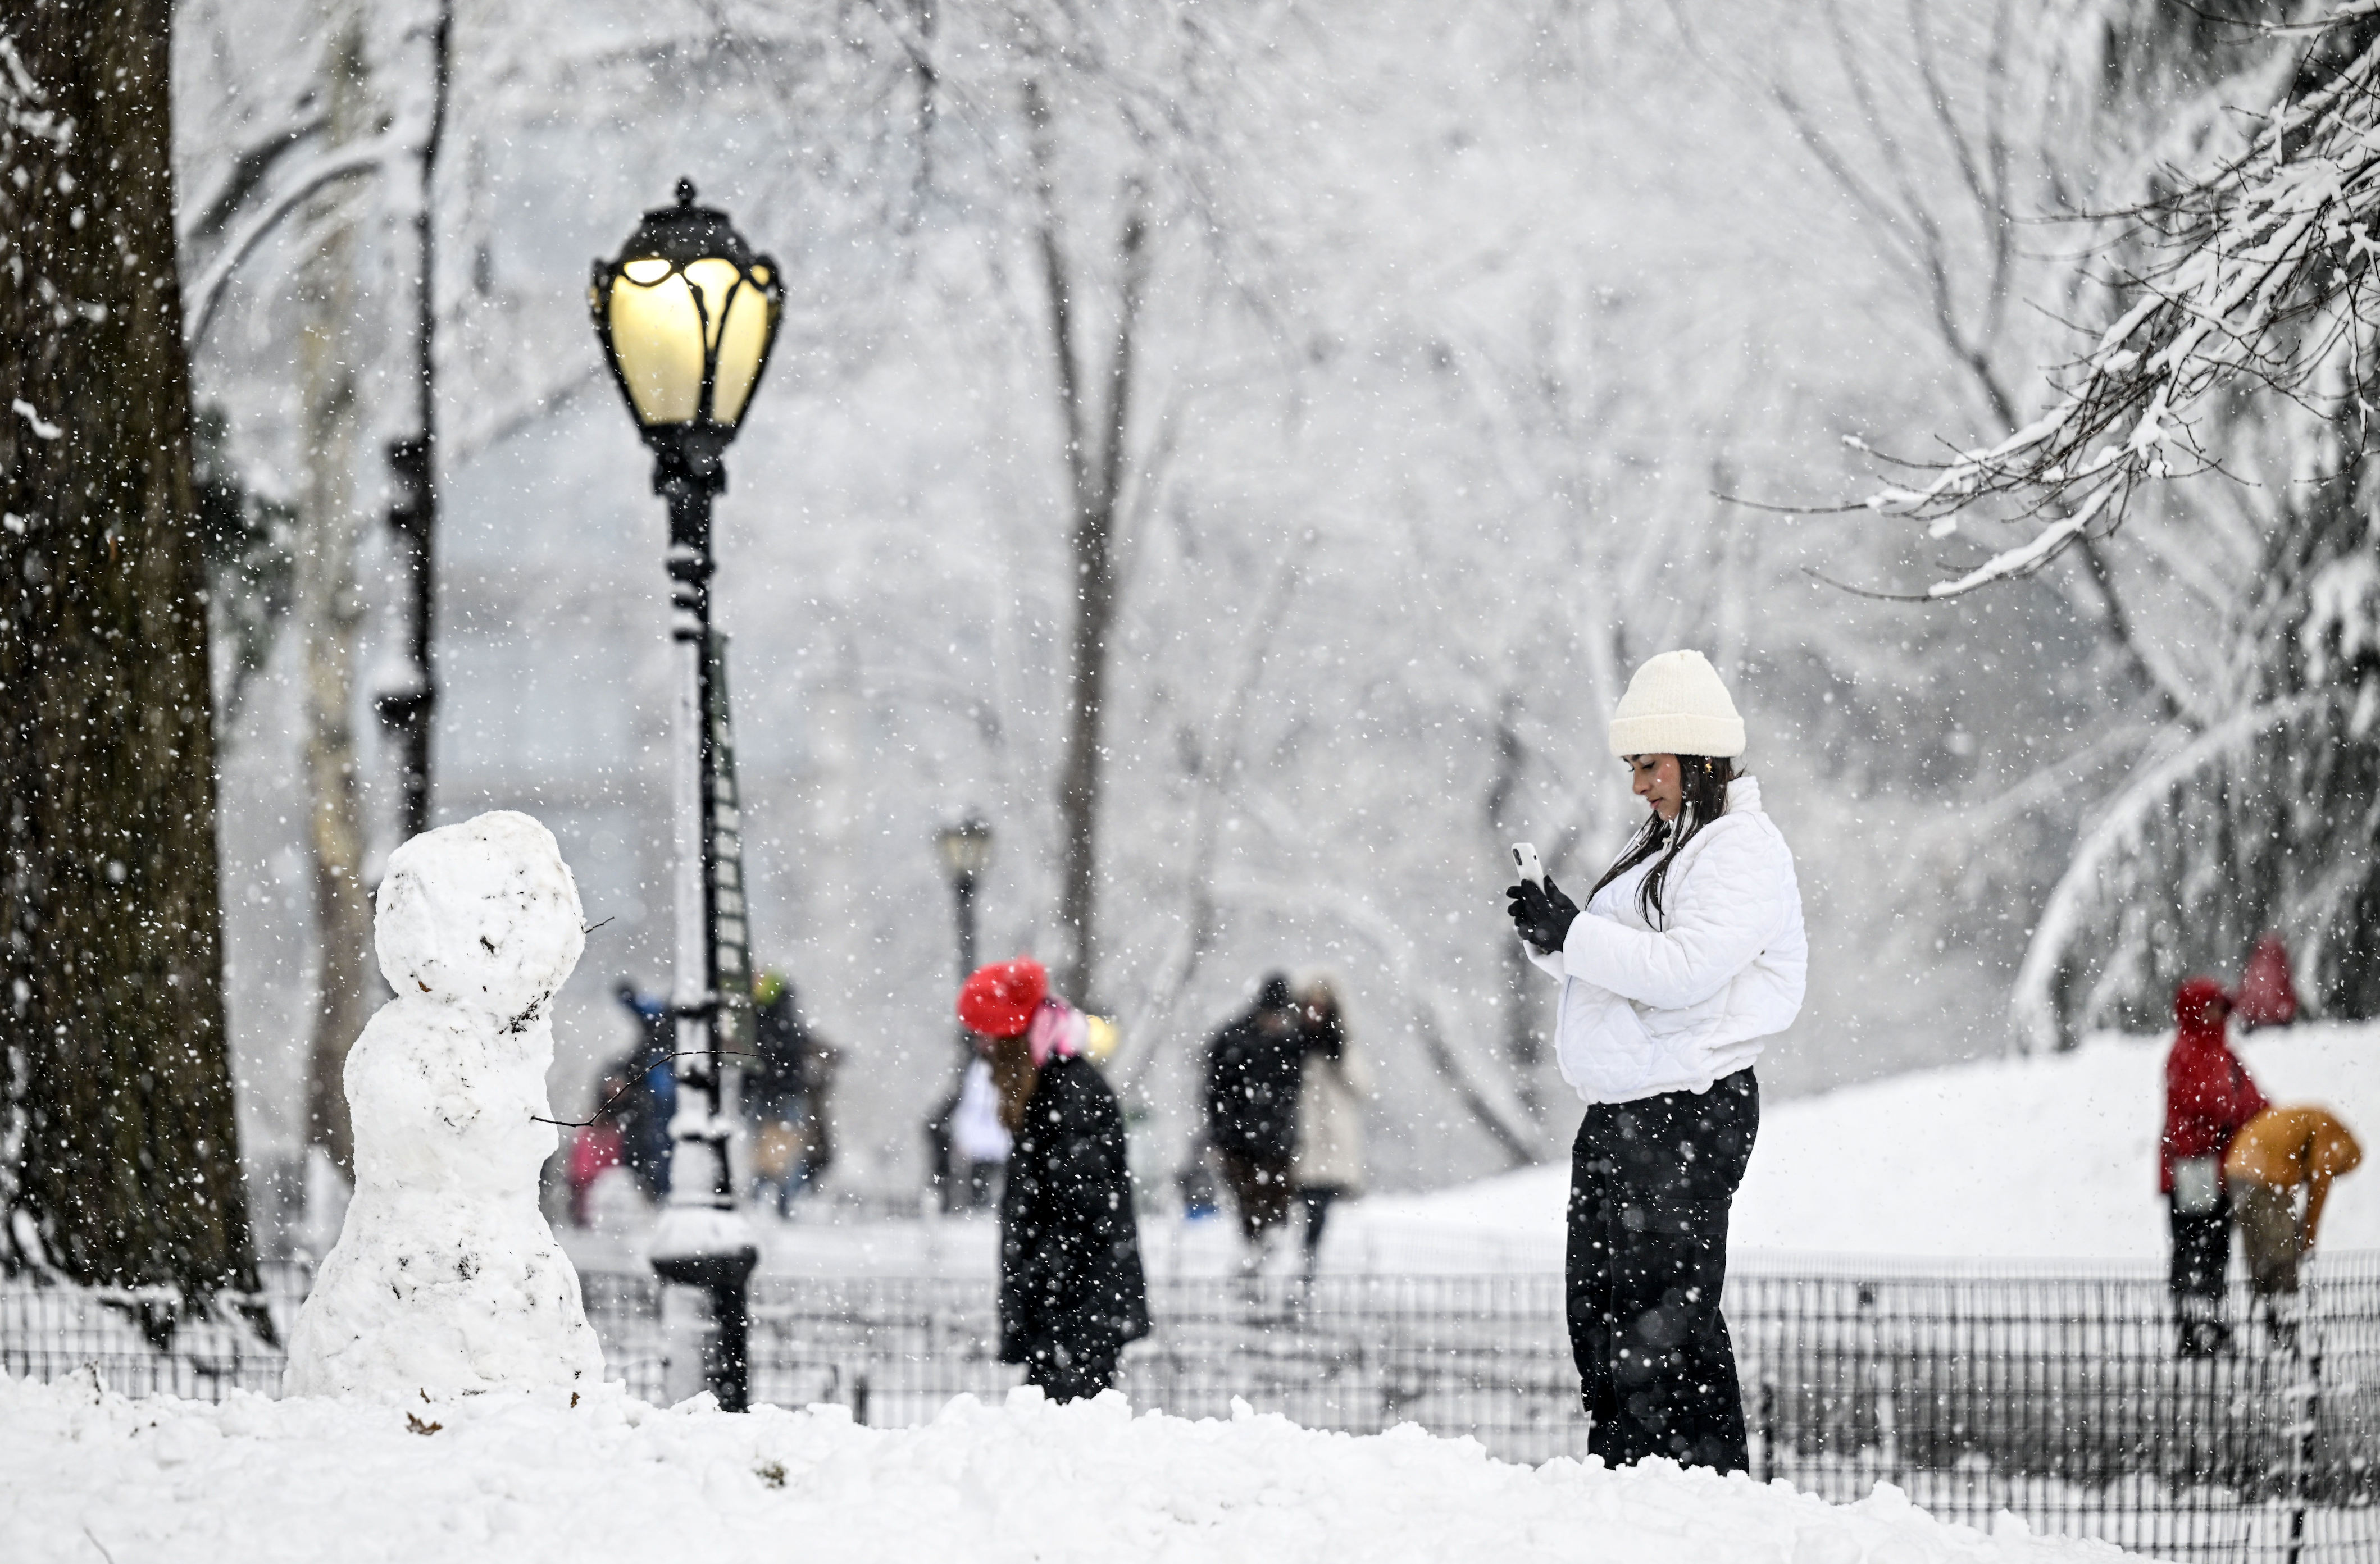 in photos: heavy snow hits new york city, southern new england